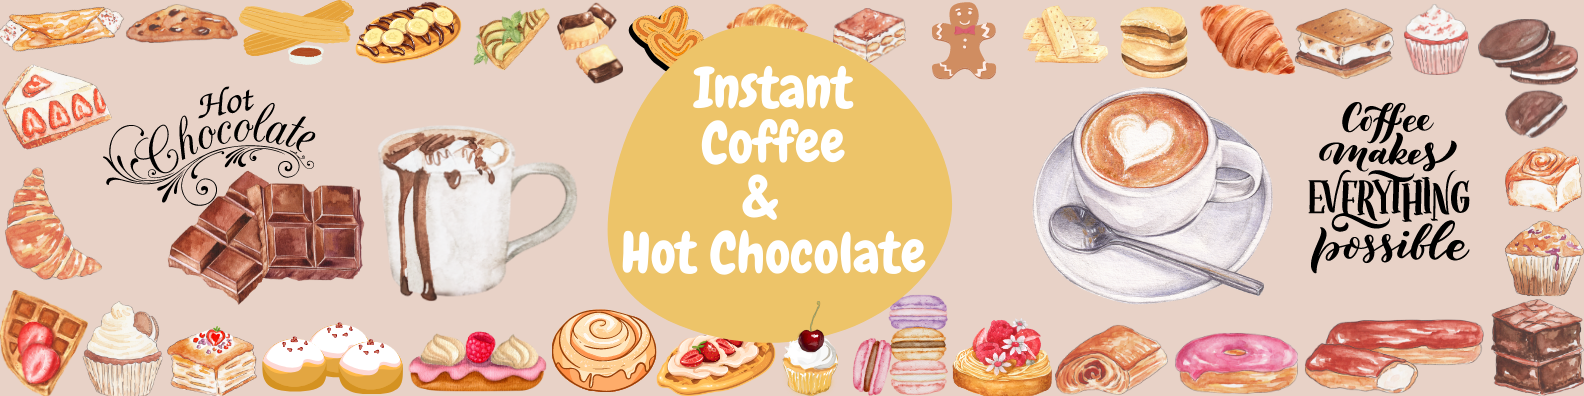 Instant Coffee & Chocolate